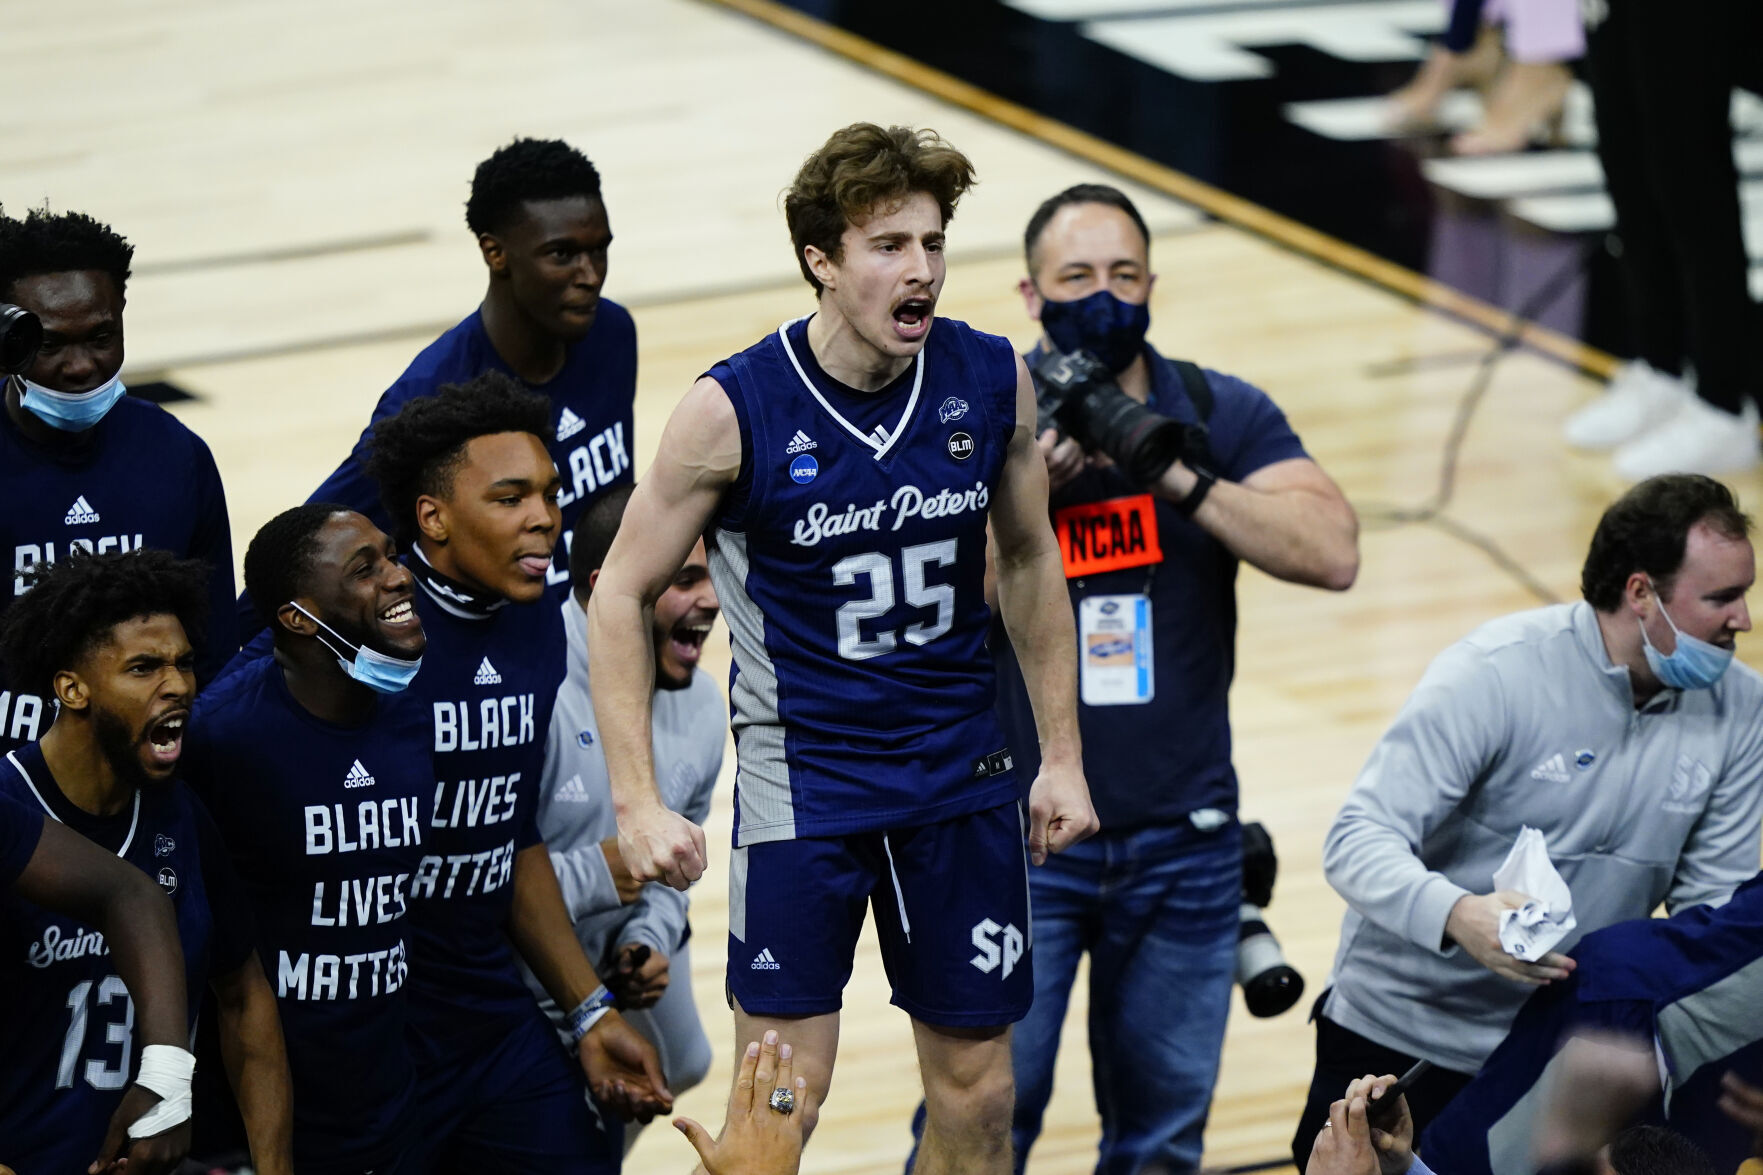 Saint Peter's the people's choice in unlikely NCAA East Regional final against UNC